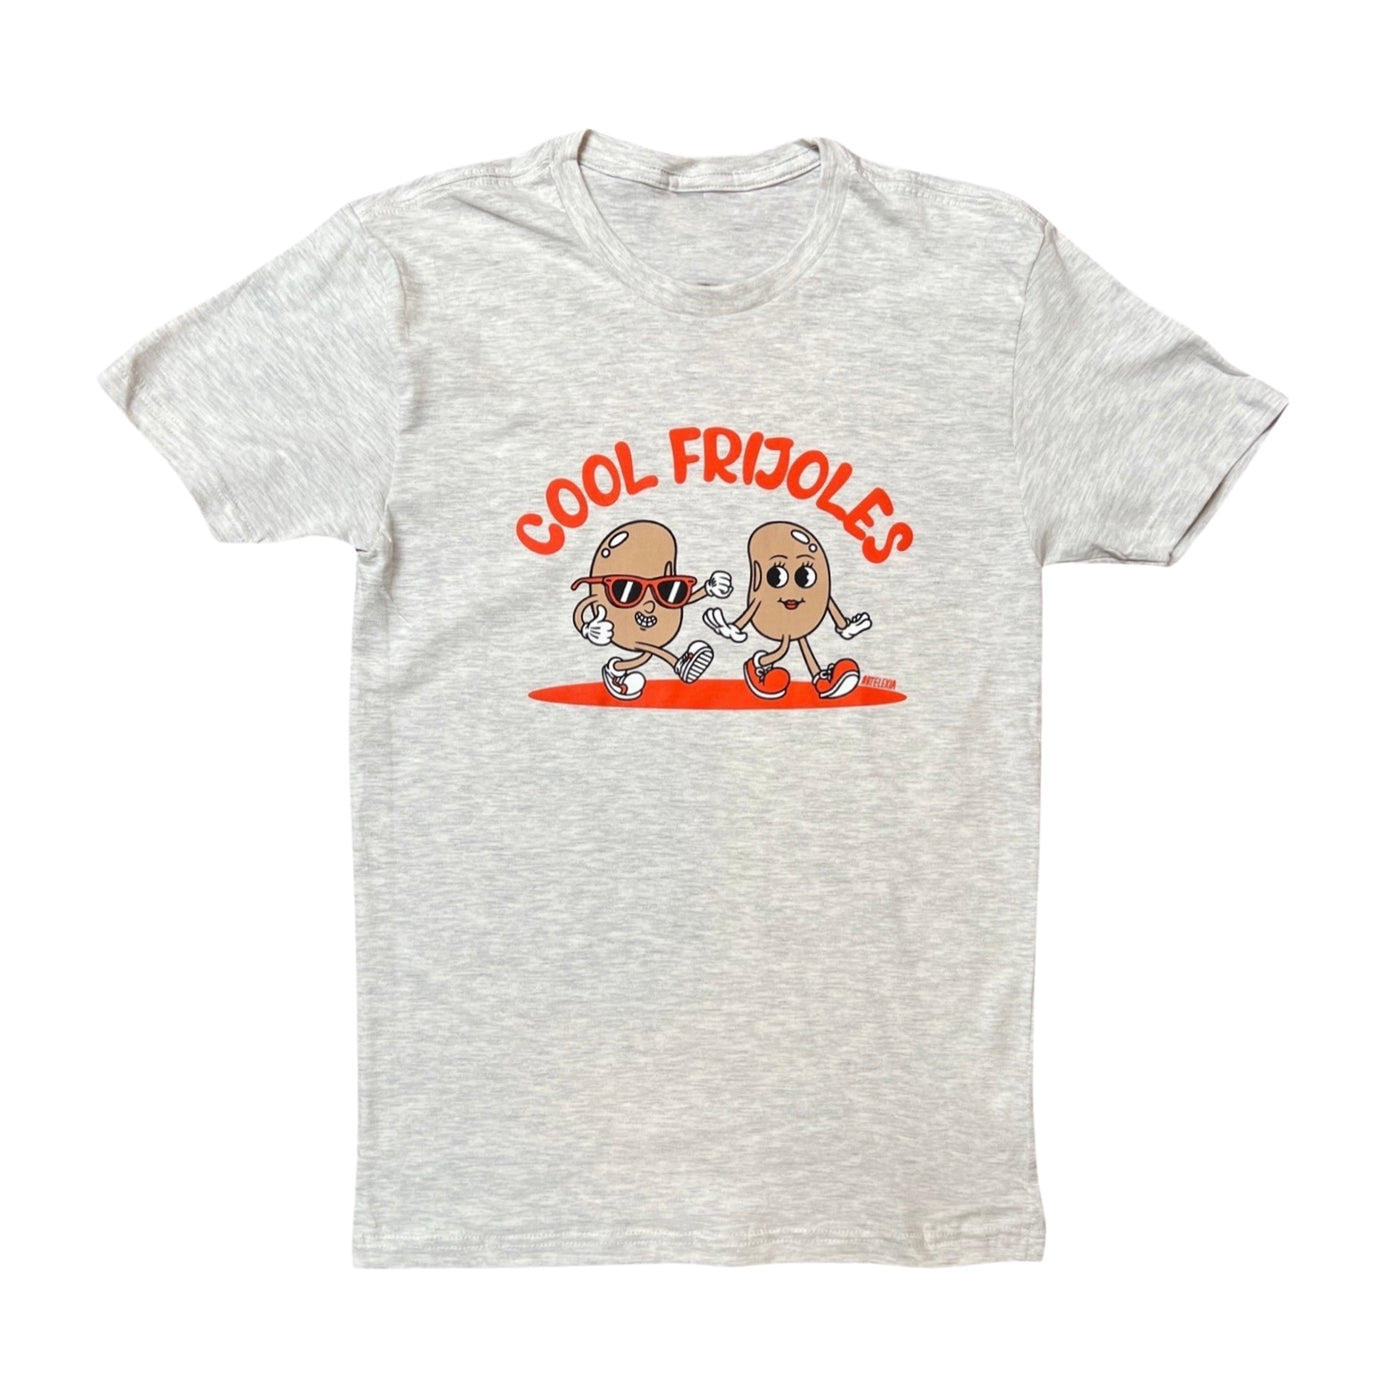 The front of a gray speckled shirt with the phrase Cool Frijoles in orange lettering featuring an illustration of two animated beans.